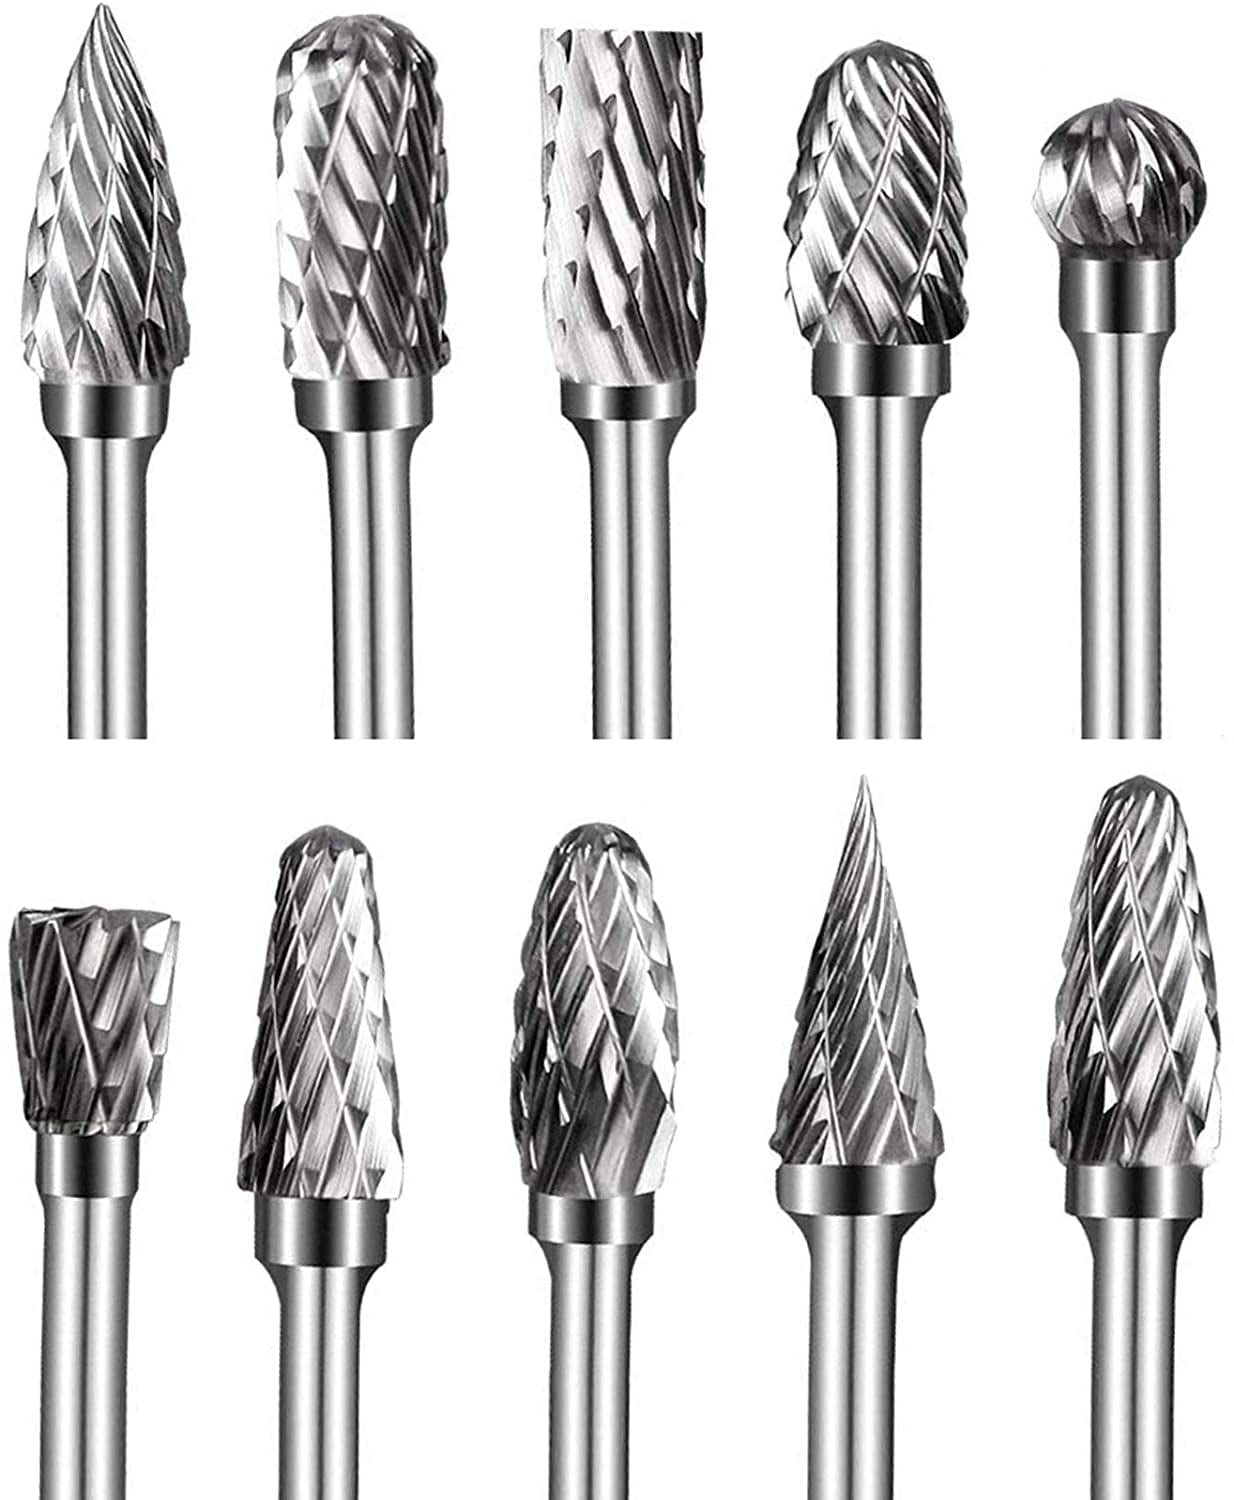 Tungsten Carbide burr drill Bit Set 10 Pcs Rotary Double Cut Carving Drill with 1/8In Shank and 1/4 In Head for Grinder Drill Wood-Working Carving Carbide Burr Set Etc Metal Polishing,Drilling 